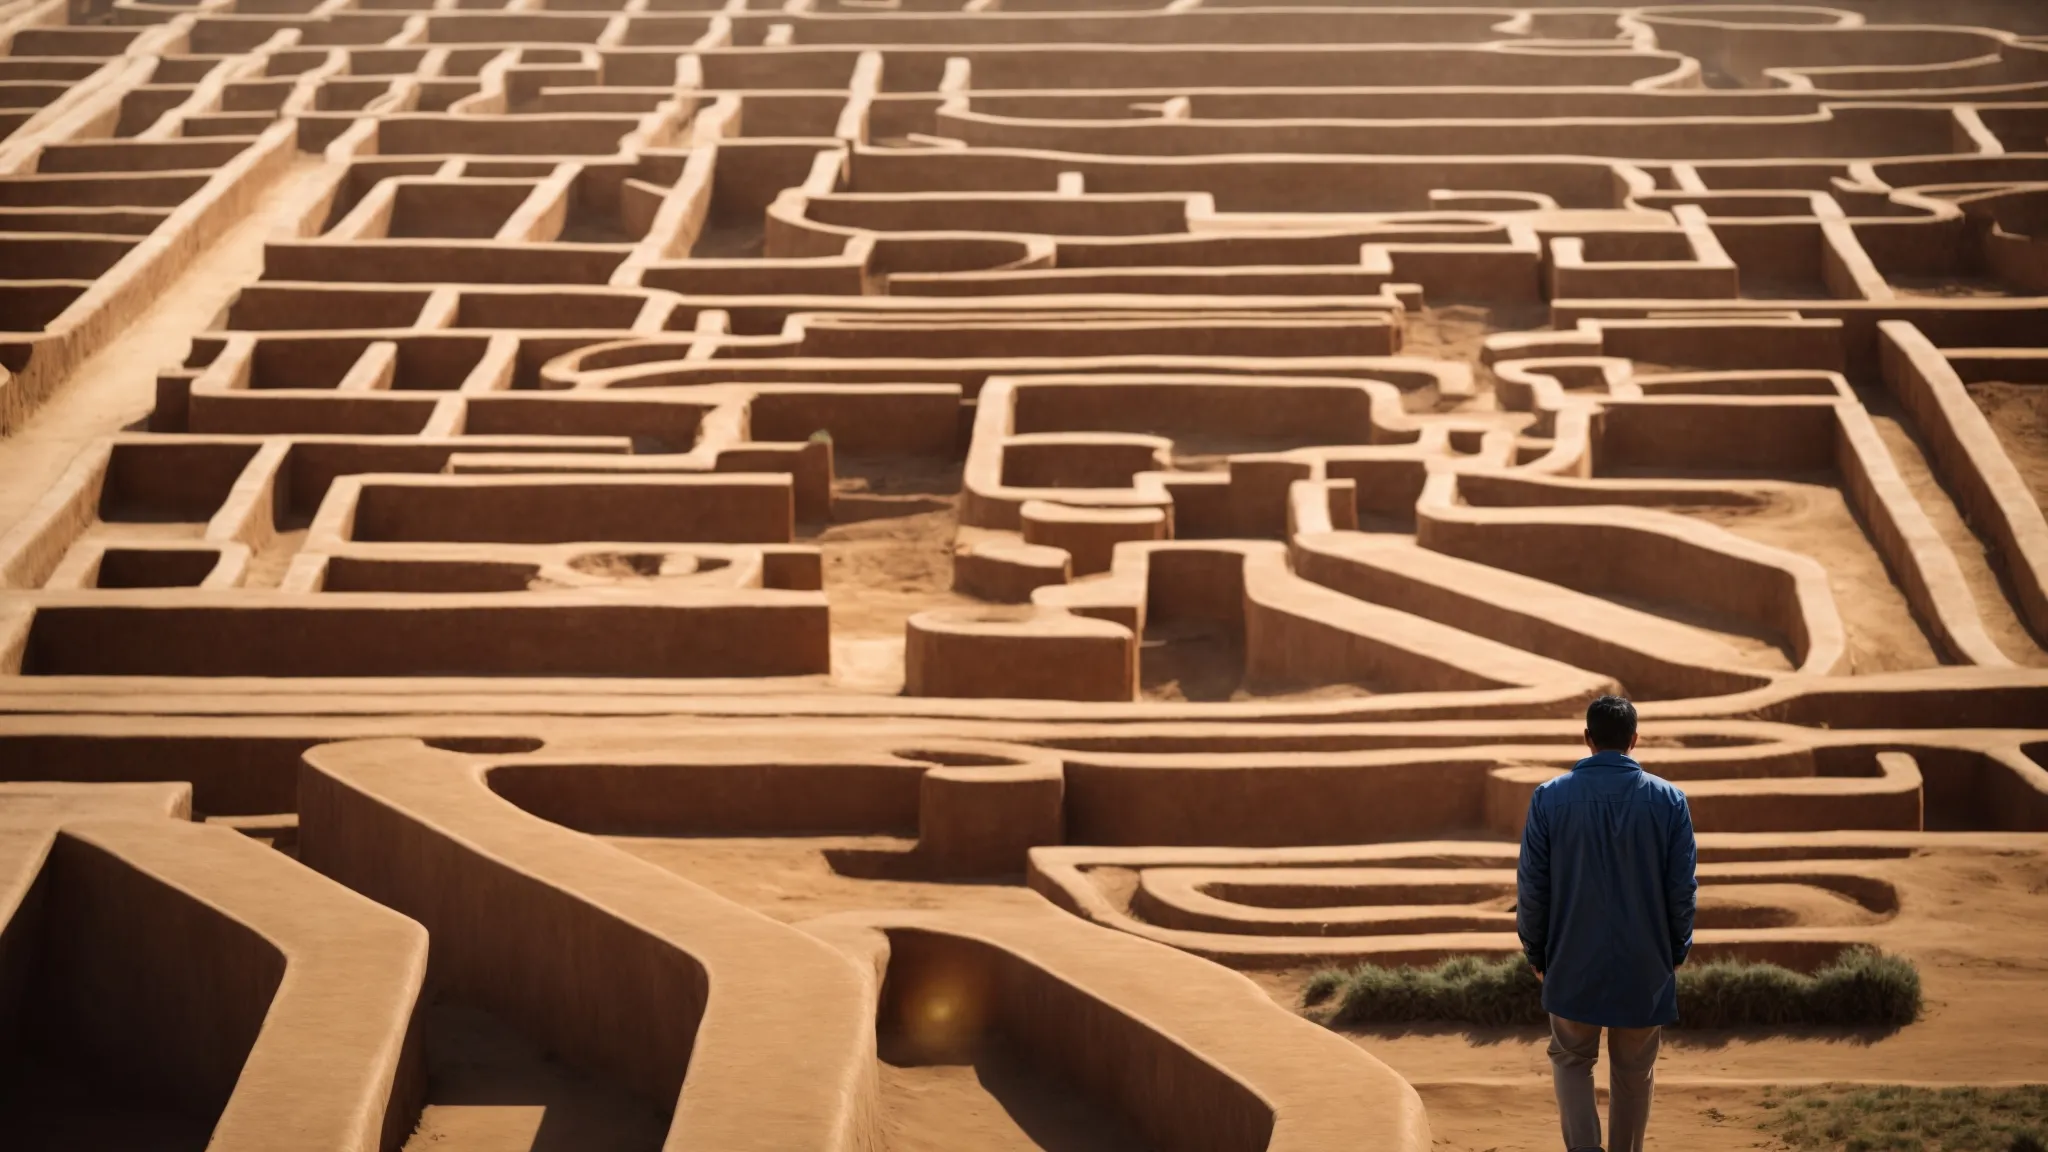 a person stands at the entrance of a vast, sunlit maze, holding a rolled-up blueprint and gazing thoughtfully at the path ahead.